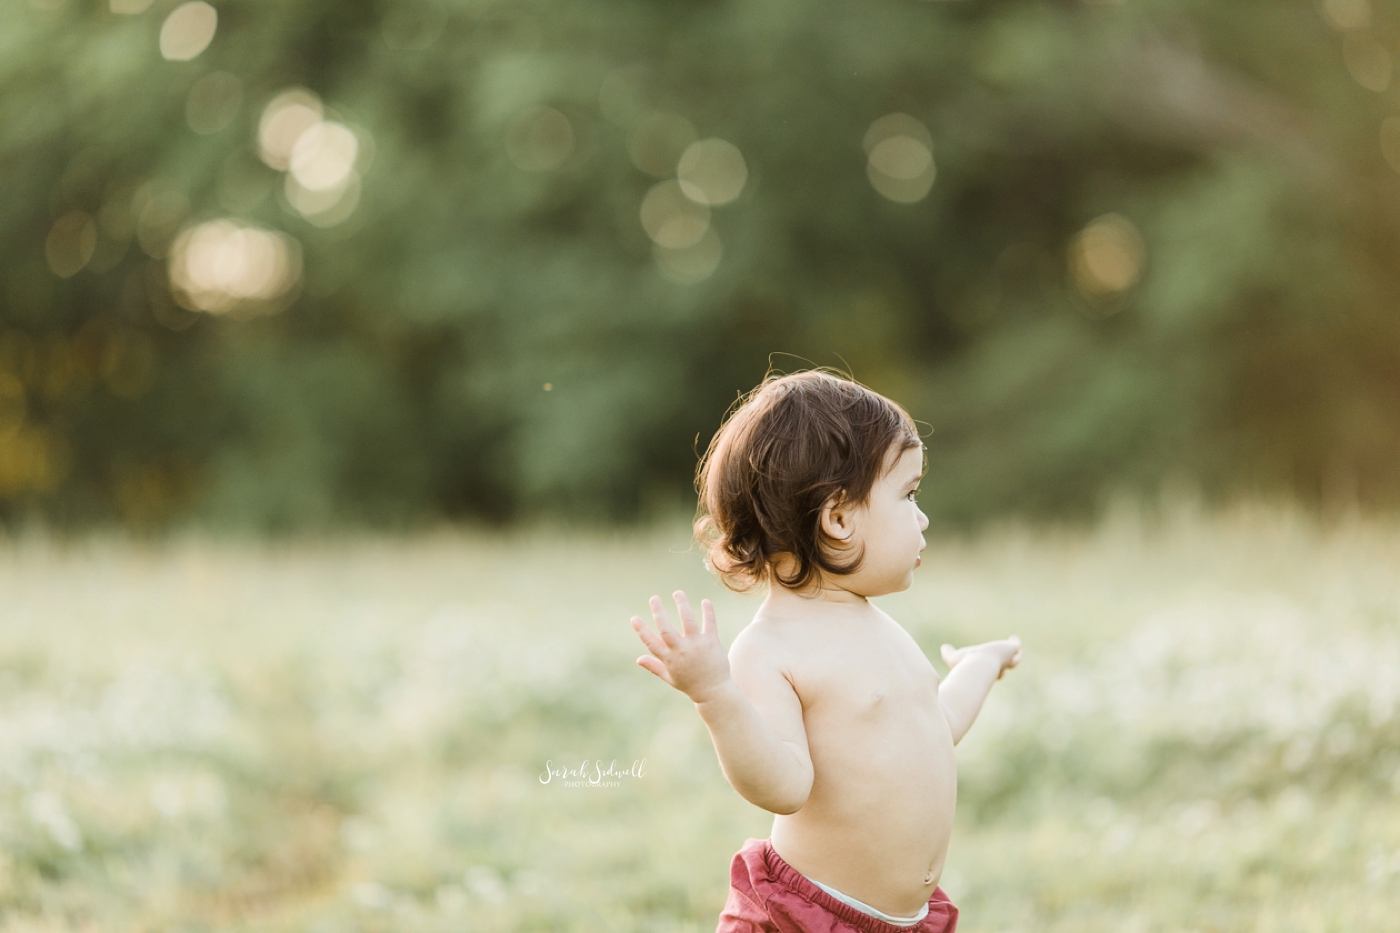 A baby wearing only bloomers walks through a grassy field. 